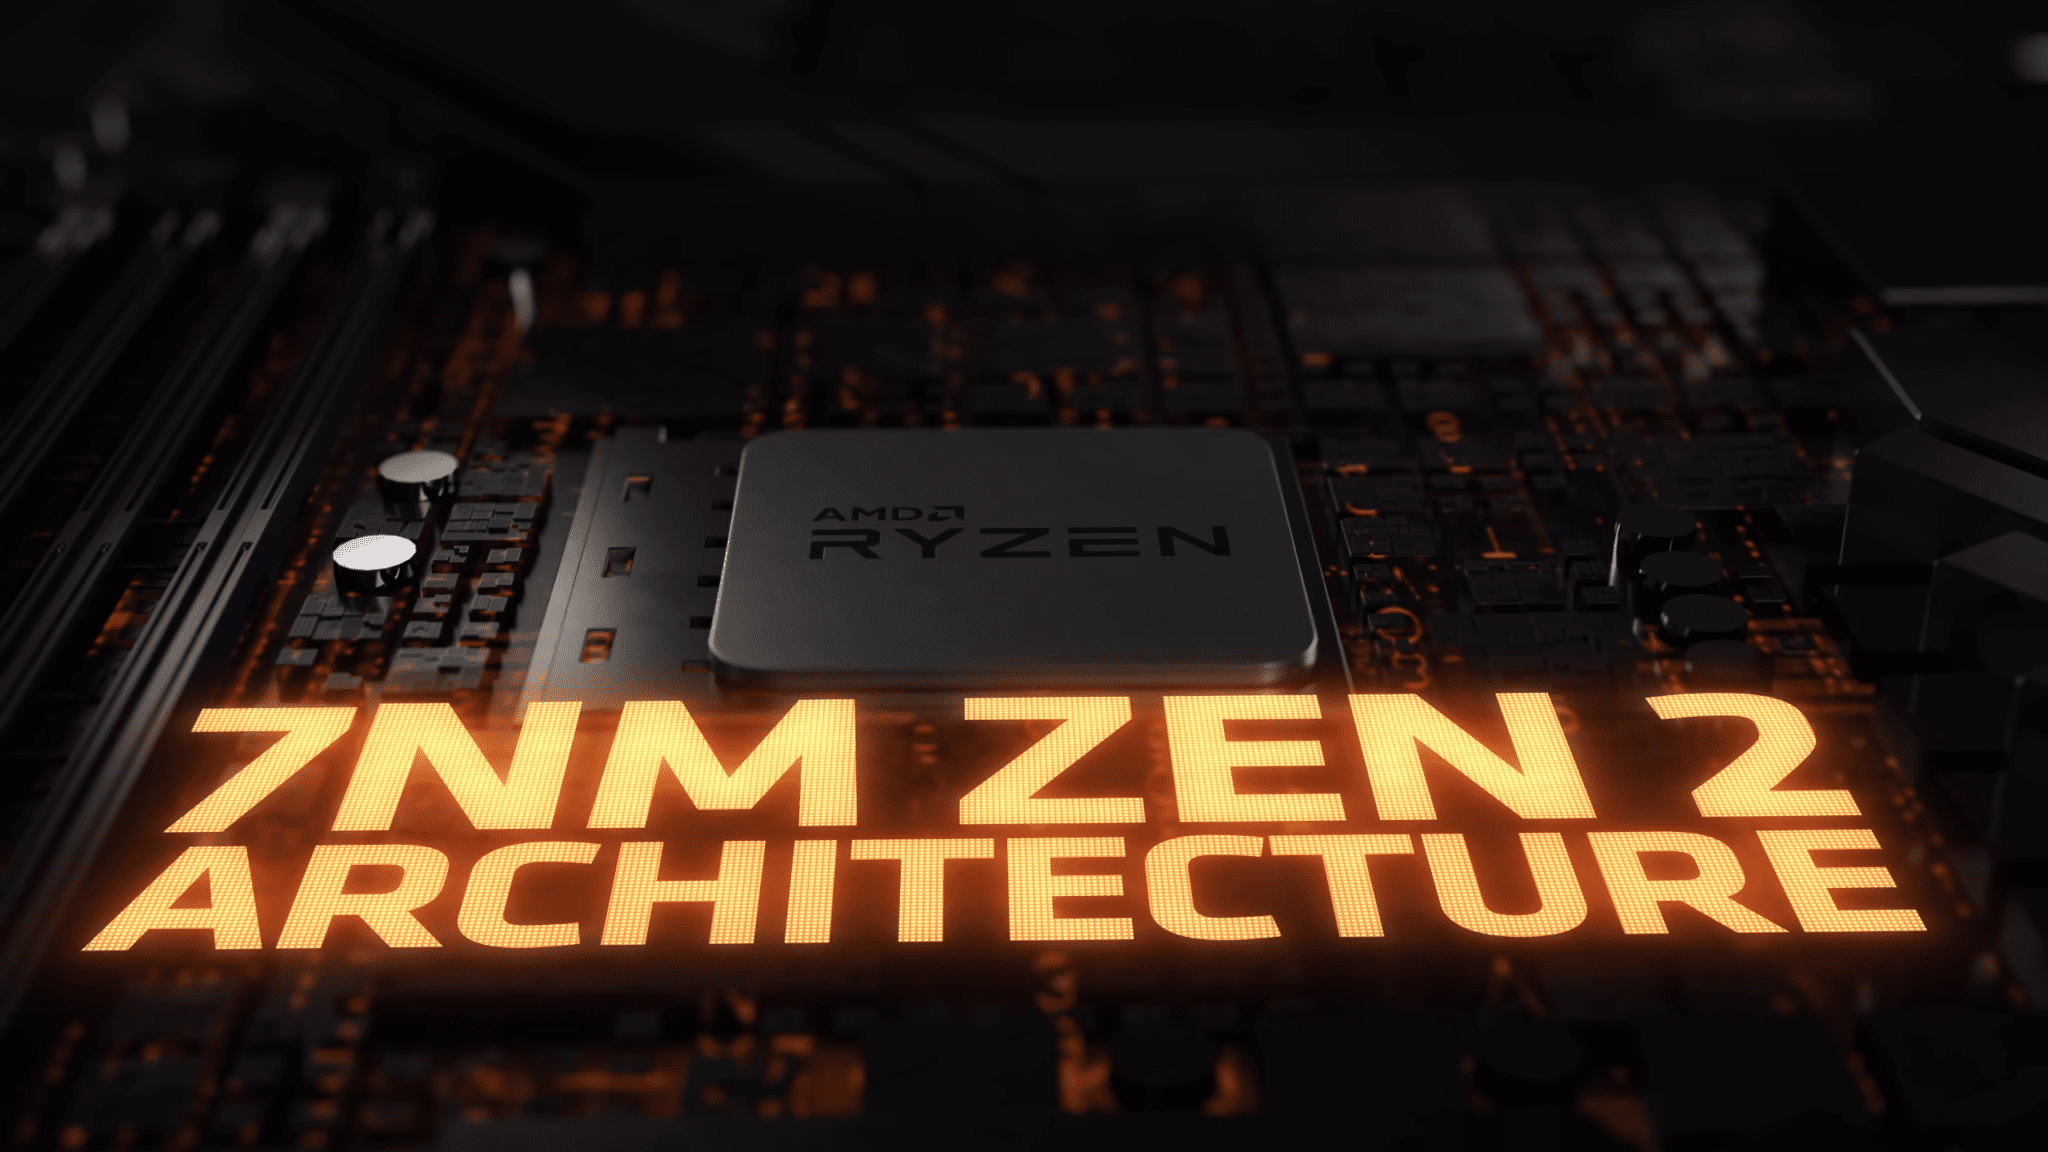 AMD to Release a 7nm Chip in Every Coming Month of 2019: Ryzen 9 3950X, Threadripper Navi 12 & 14